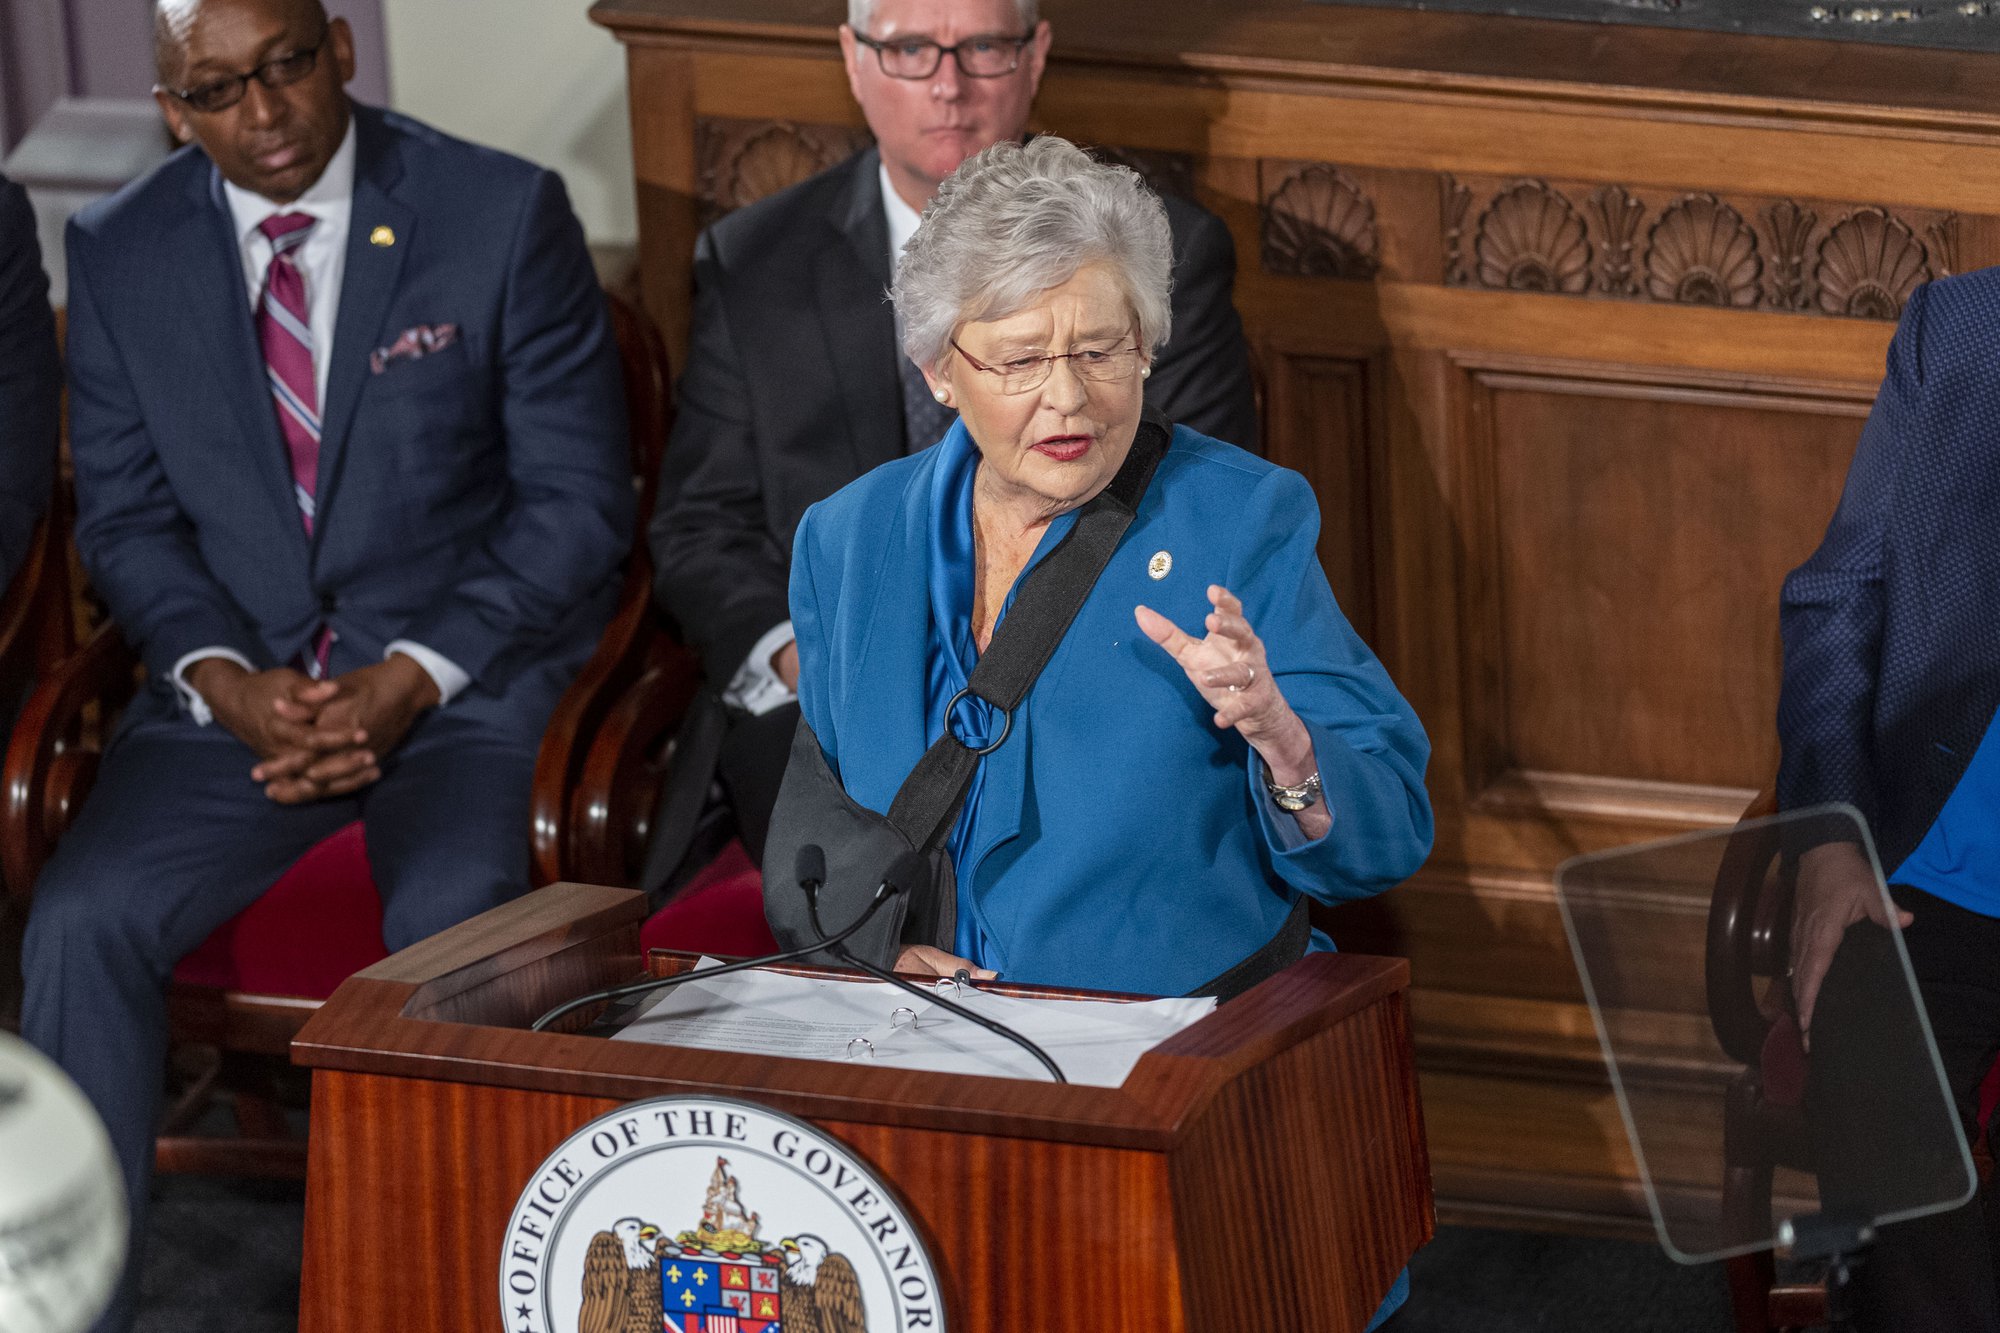 Gov. Kay Ivey gives the State of the State Address to a joint session of the Alabama Legislature on Tuesday, Feb. 4, 2020, in the old house chamber of the Alabama State Capitol in Montgomery, Ala. (AP Photo/Vasha Hunt)